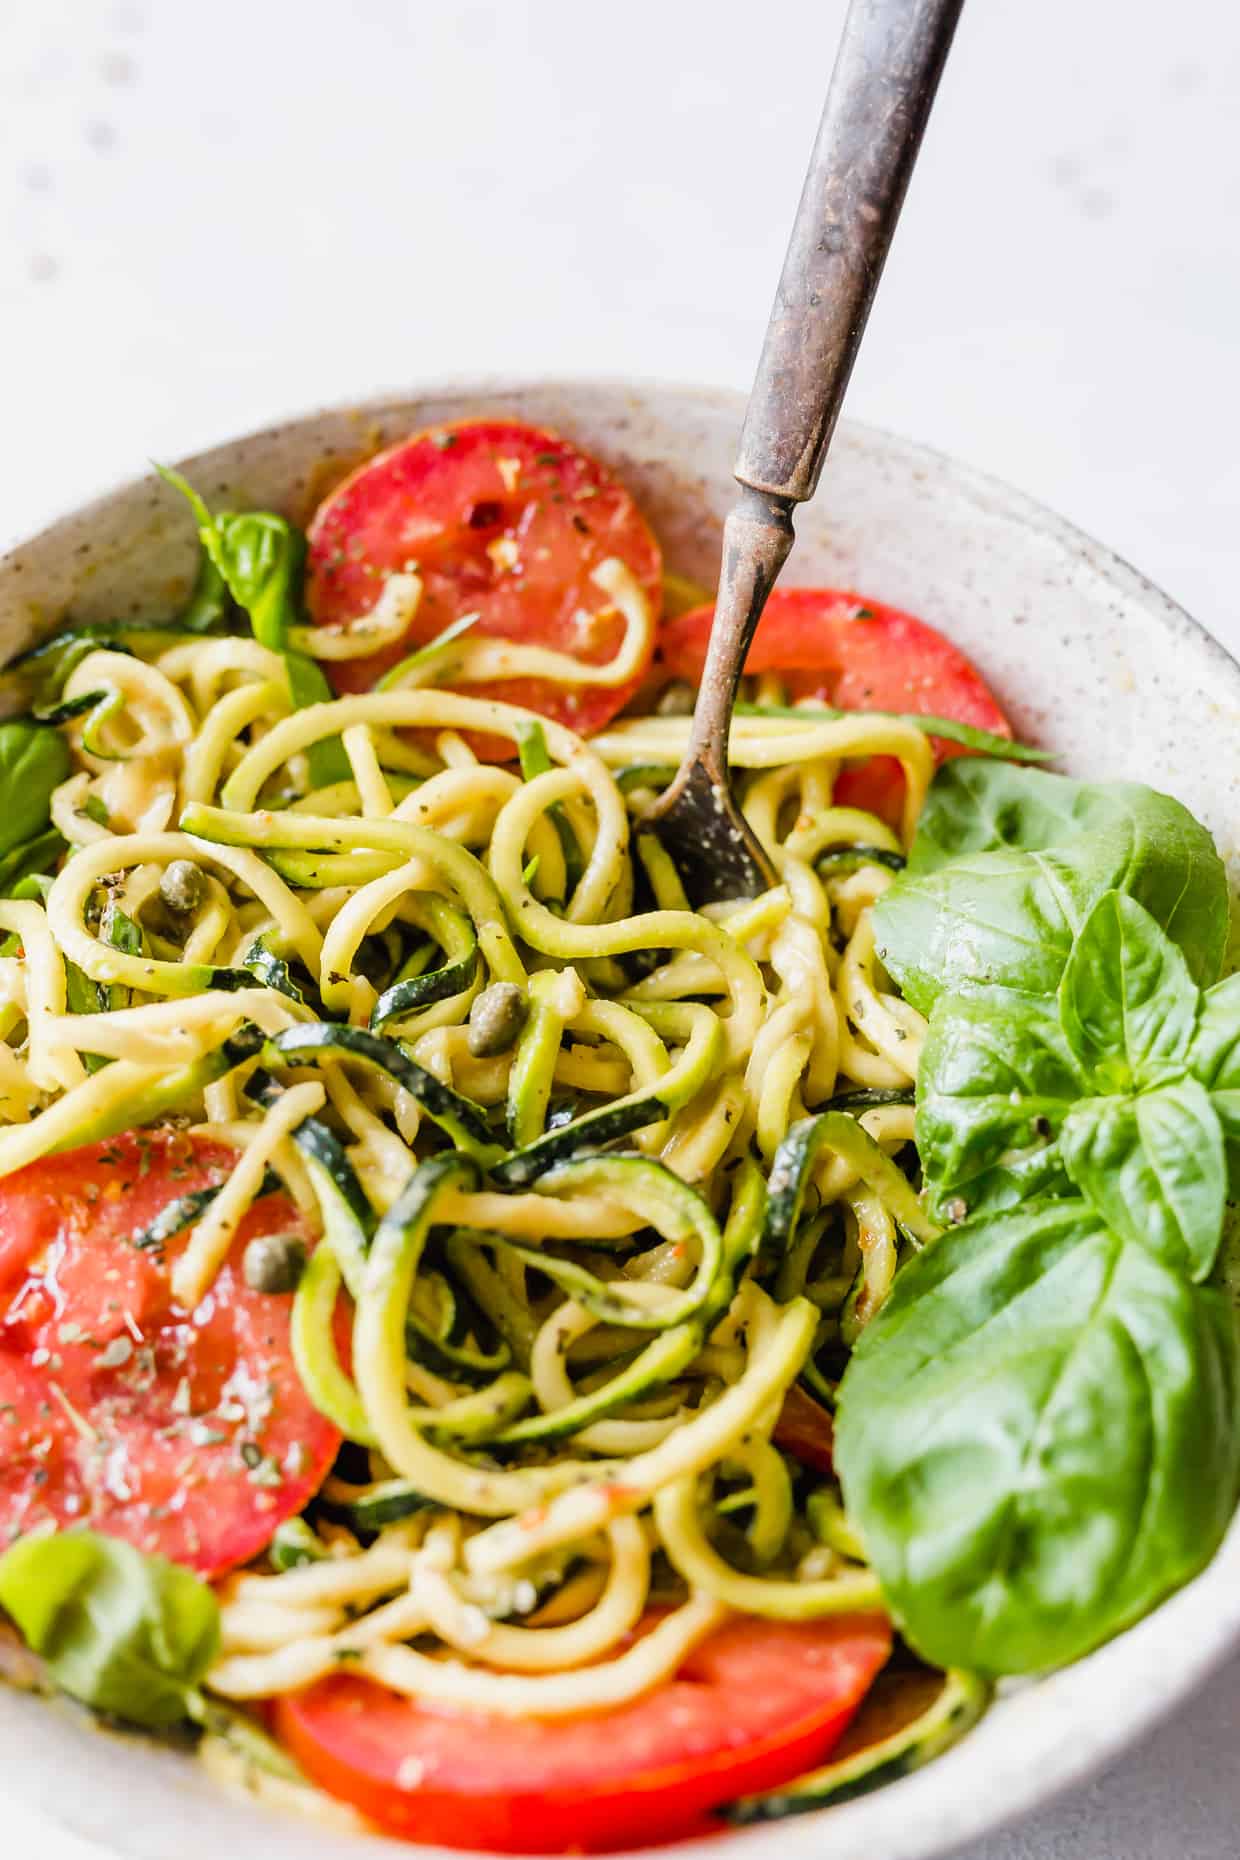 Delicious zucchini noodles are used to make this 5-Minute Cheesy Zucchetti Bowl from Cotter Crunch's new cookbook! This dish takes 5 minutes to make, is gluten-free, and low carb!